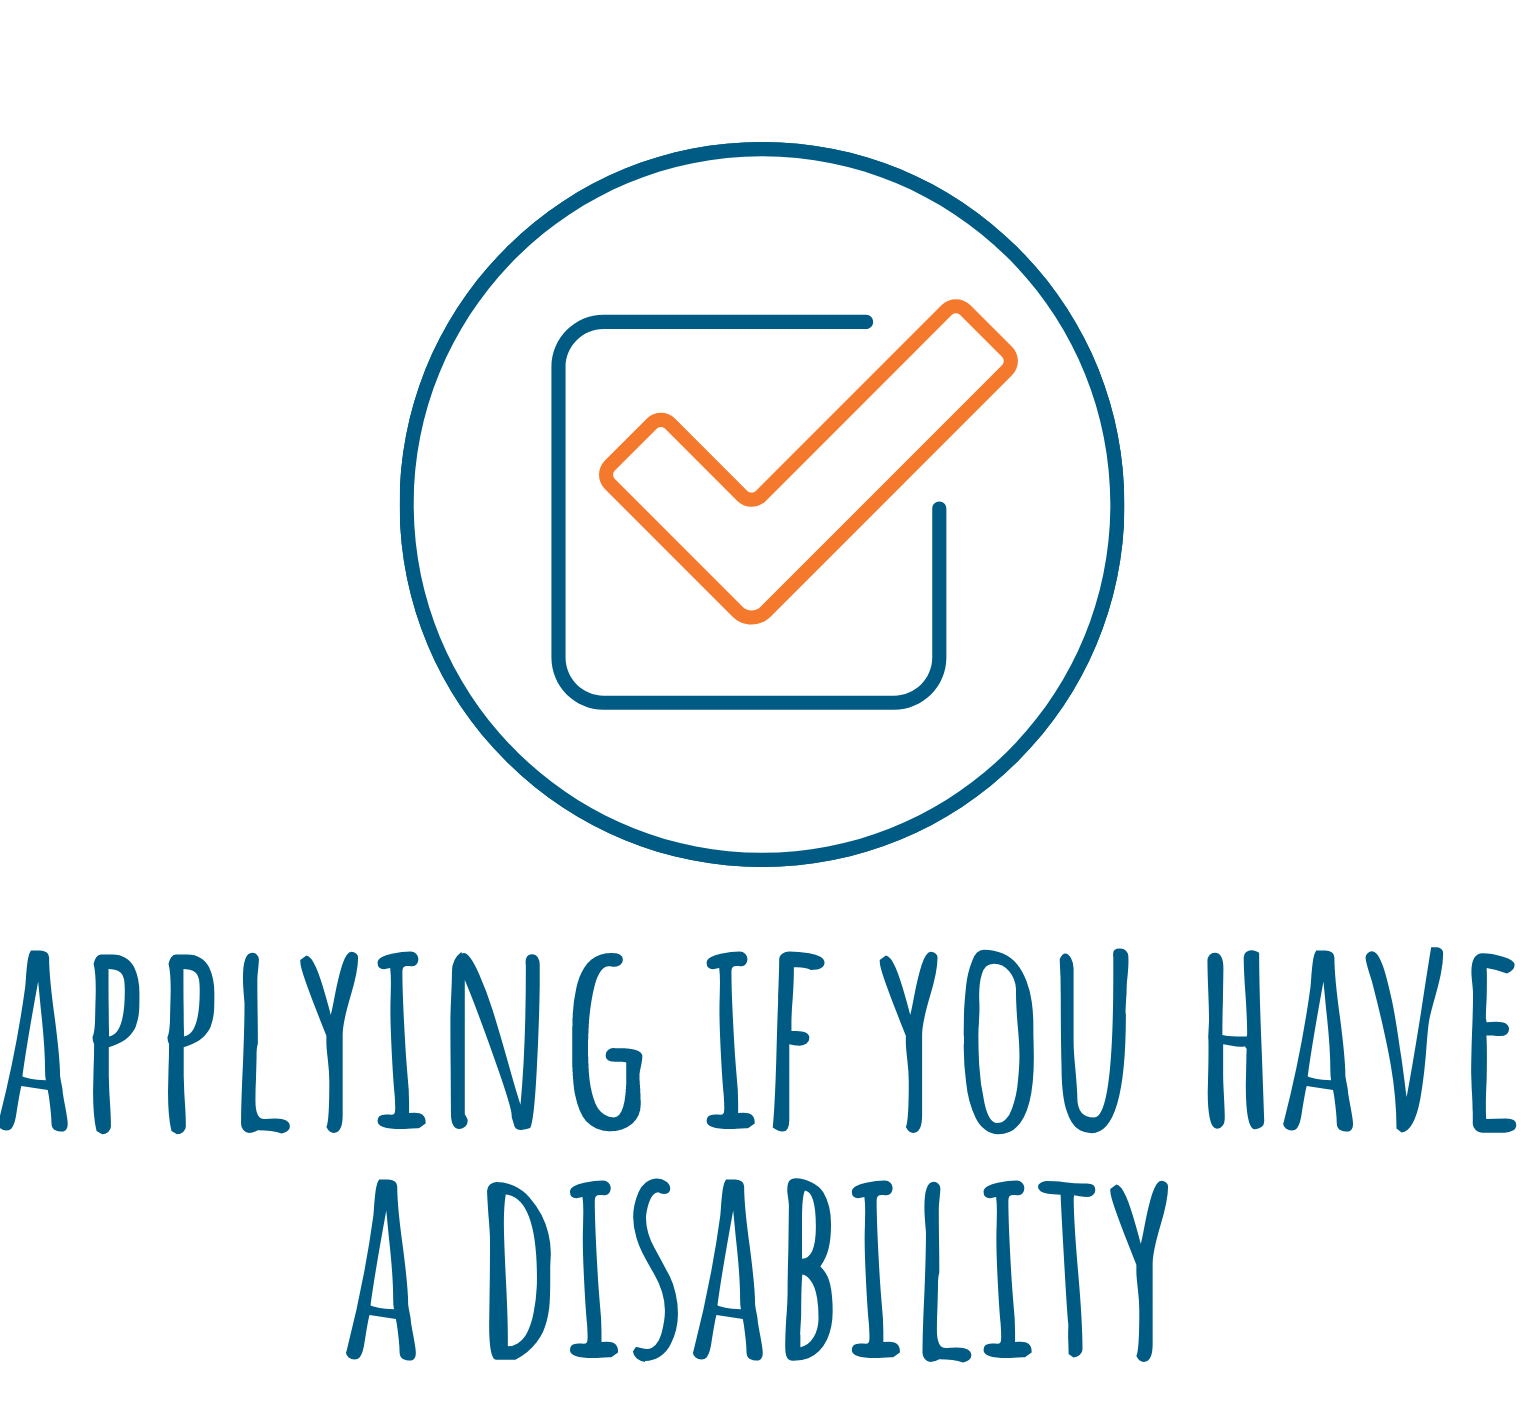 Applying if you have a disability